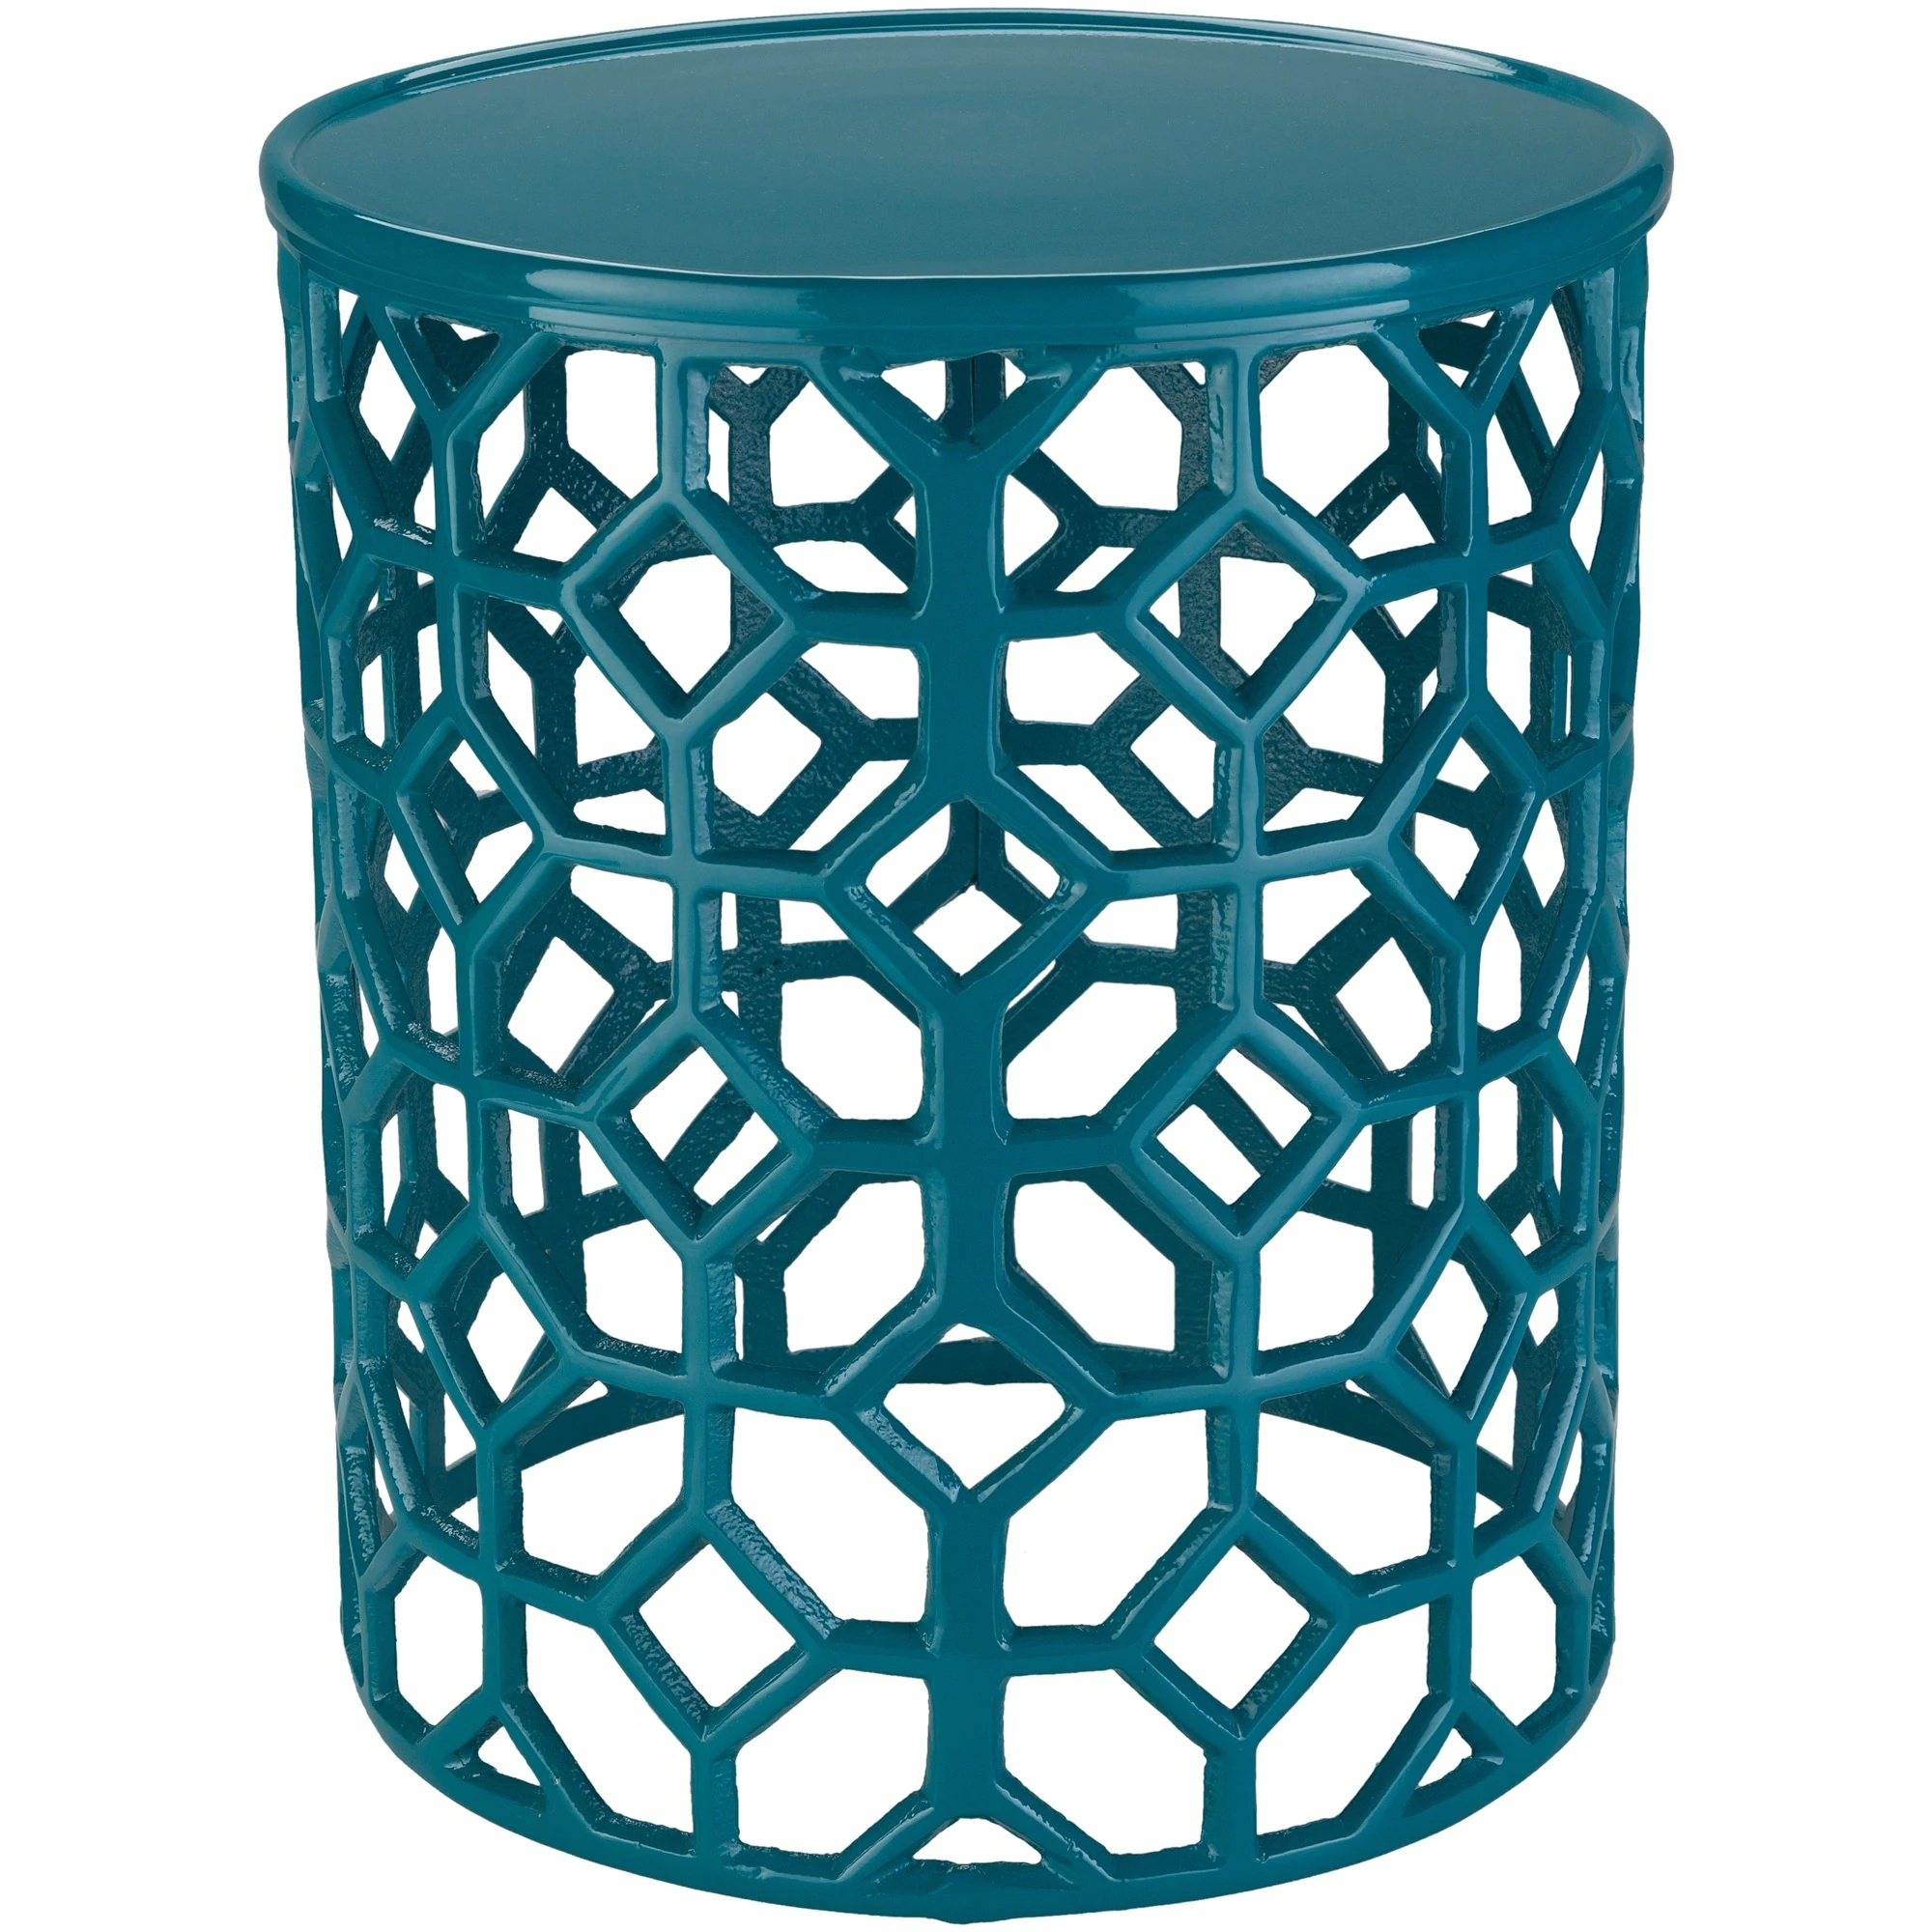 meuric teal transitional inch metal accent table freya round free shipping today centrepiece lamp base build small oak mission end glass telephone runner wrought iron lamps